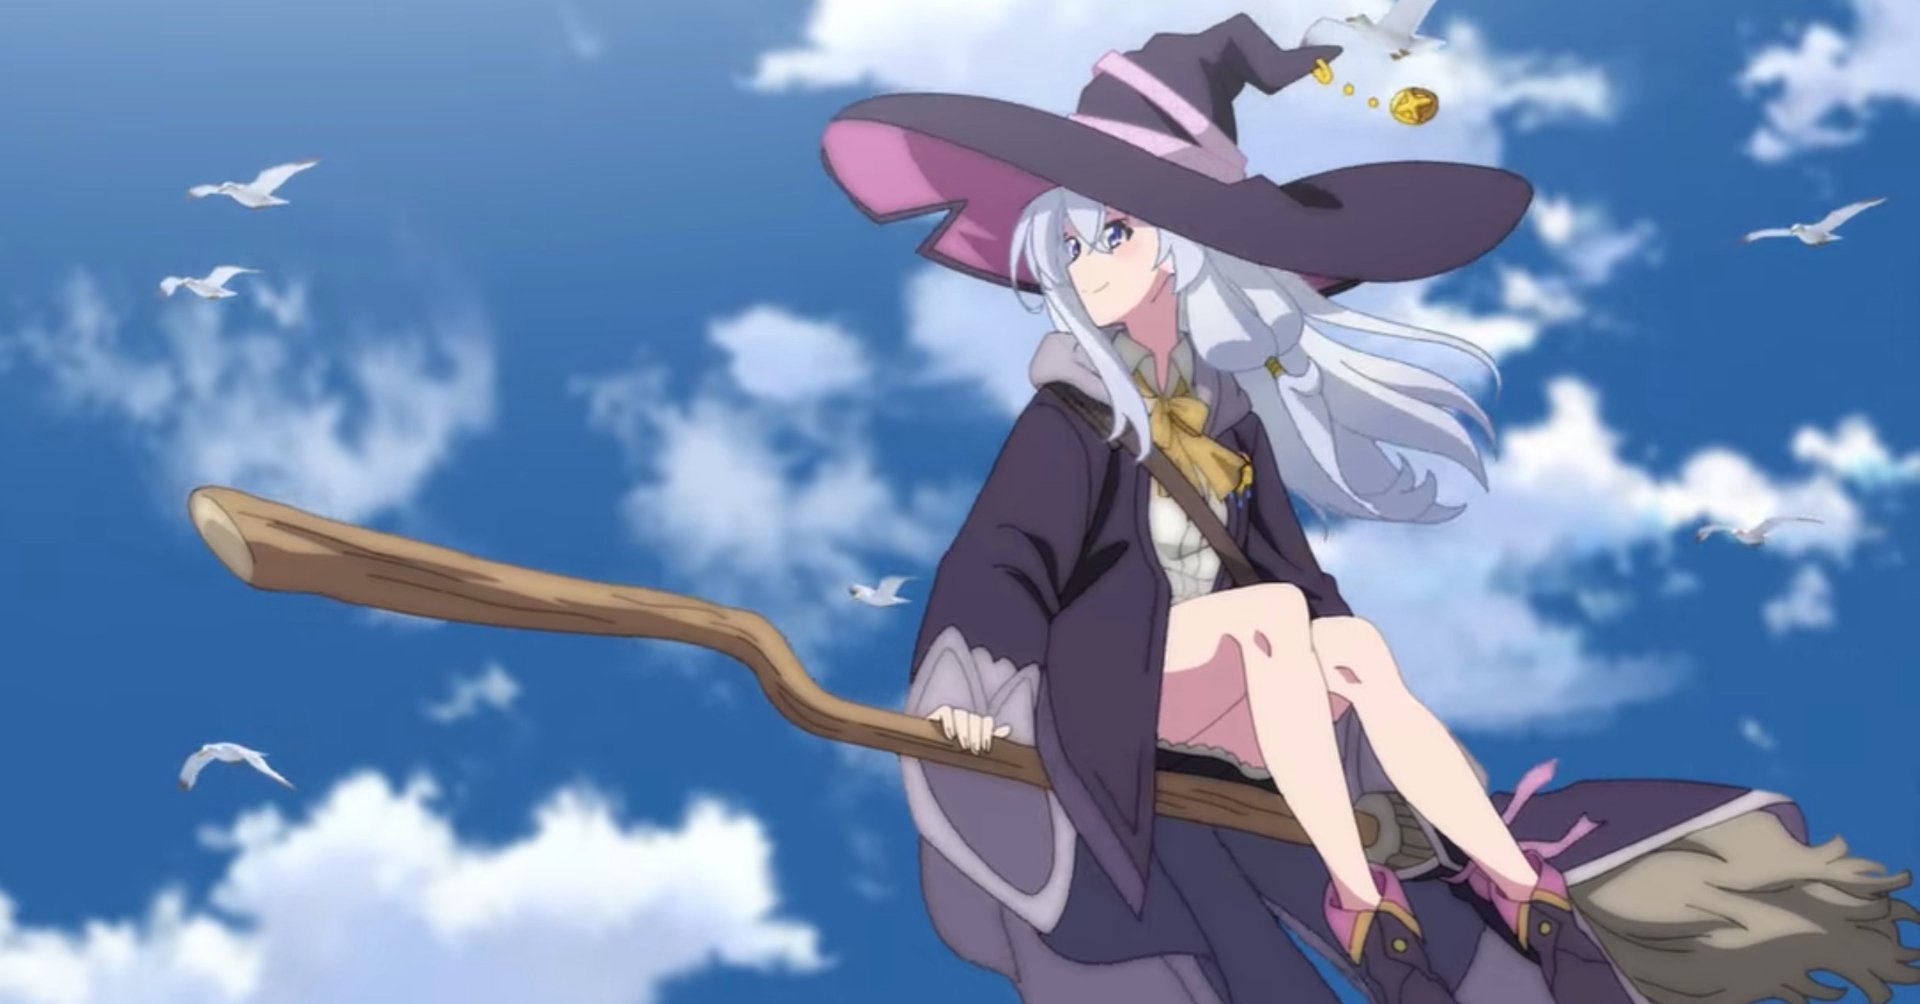 Top 50 Best Witch Anime Recommended List To Watch  Anime Witch Fairy  tales